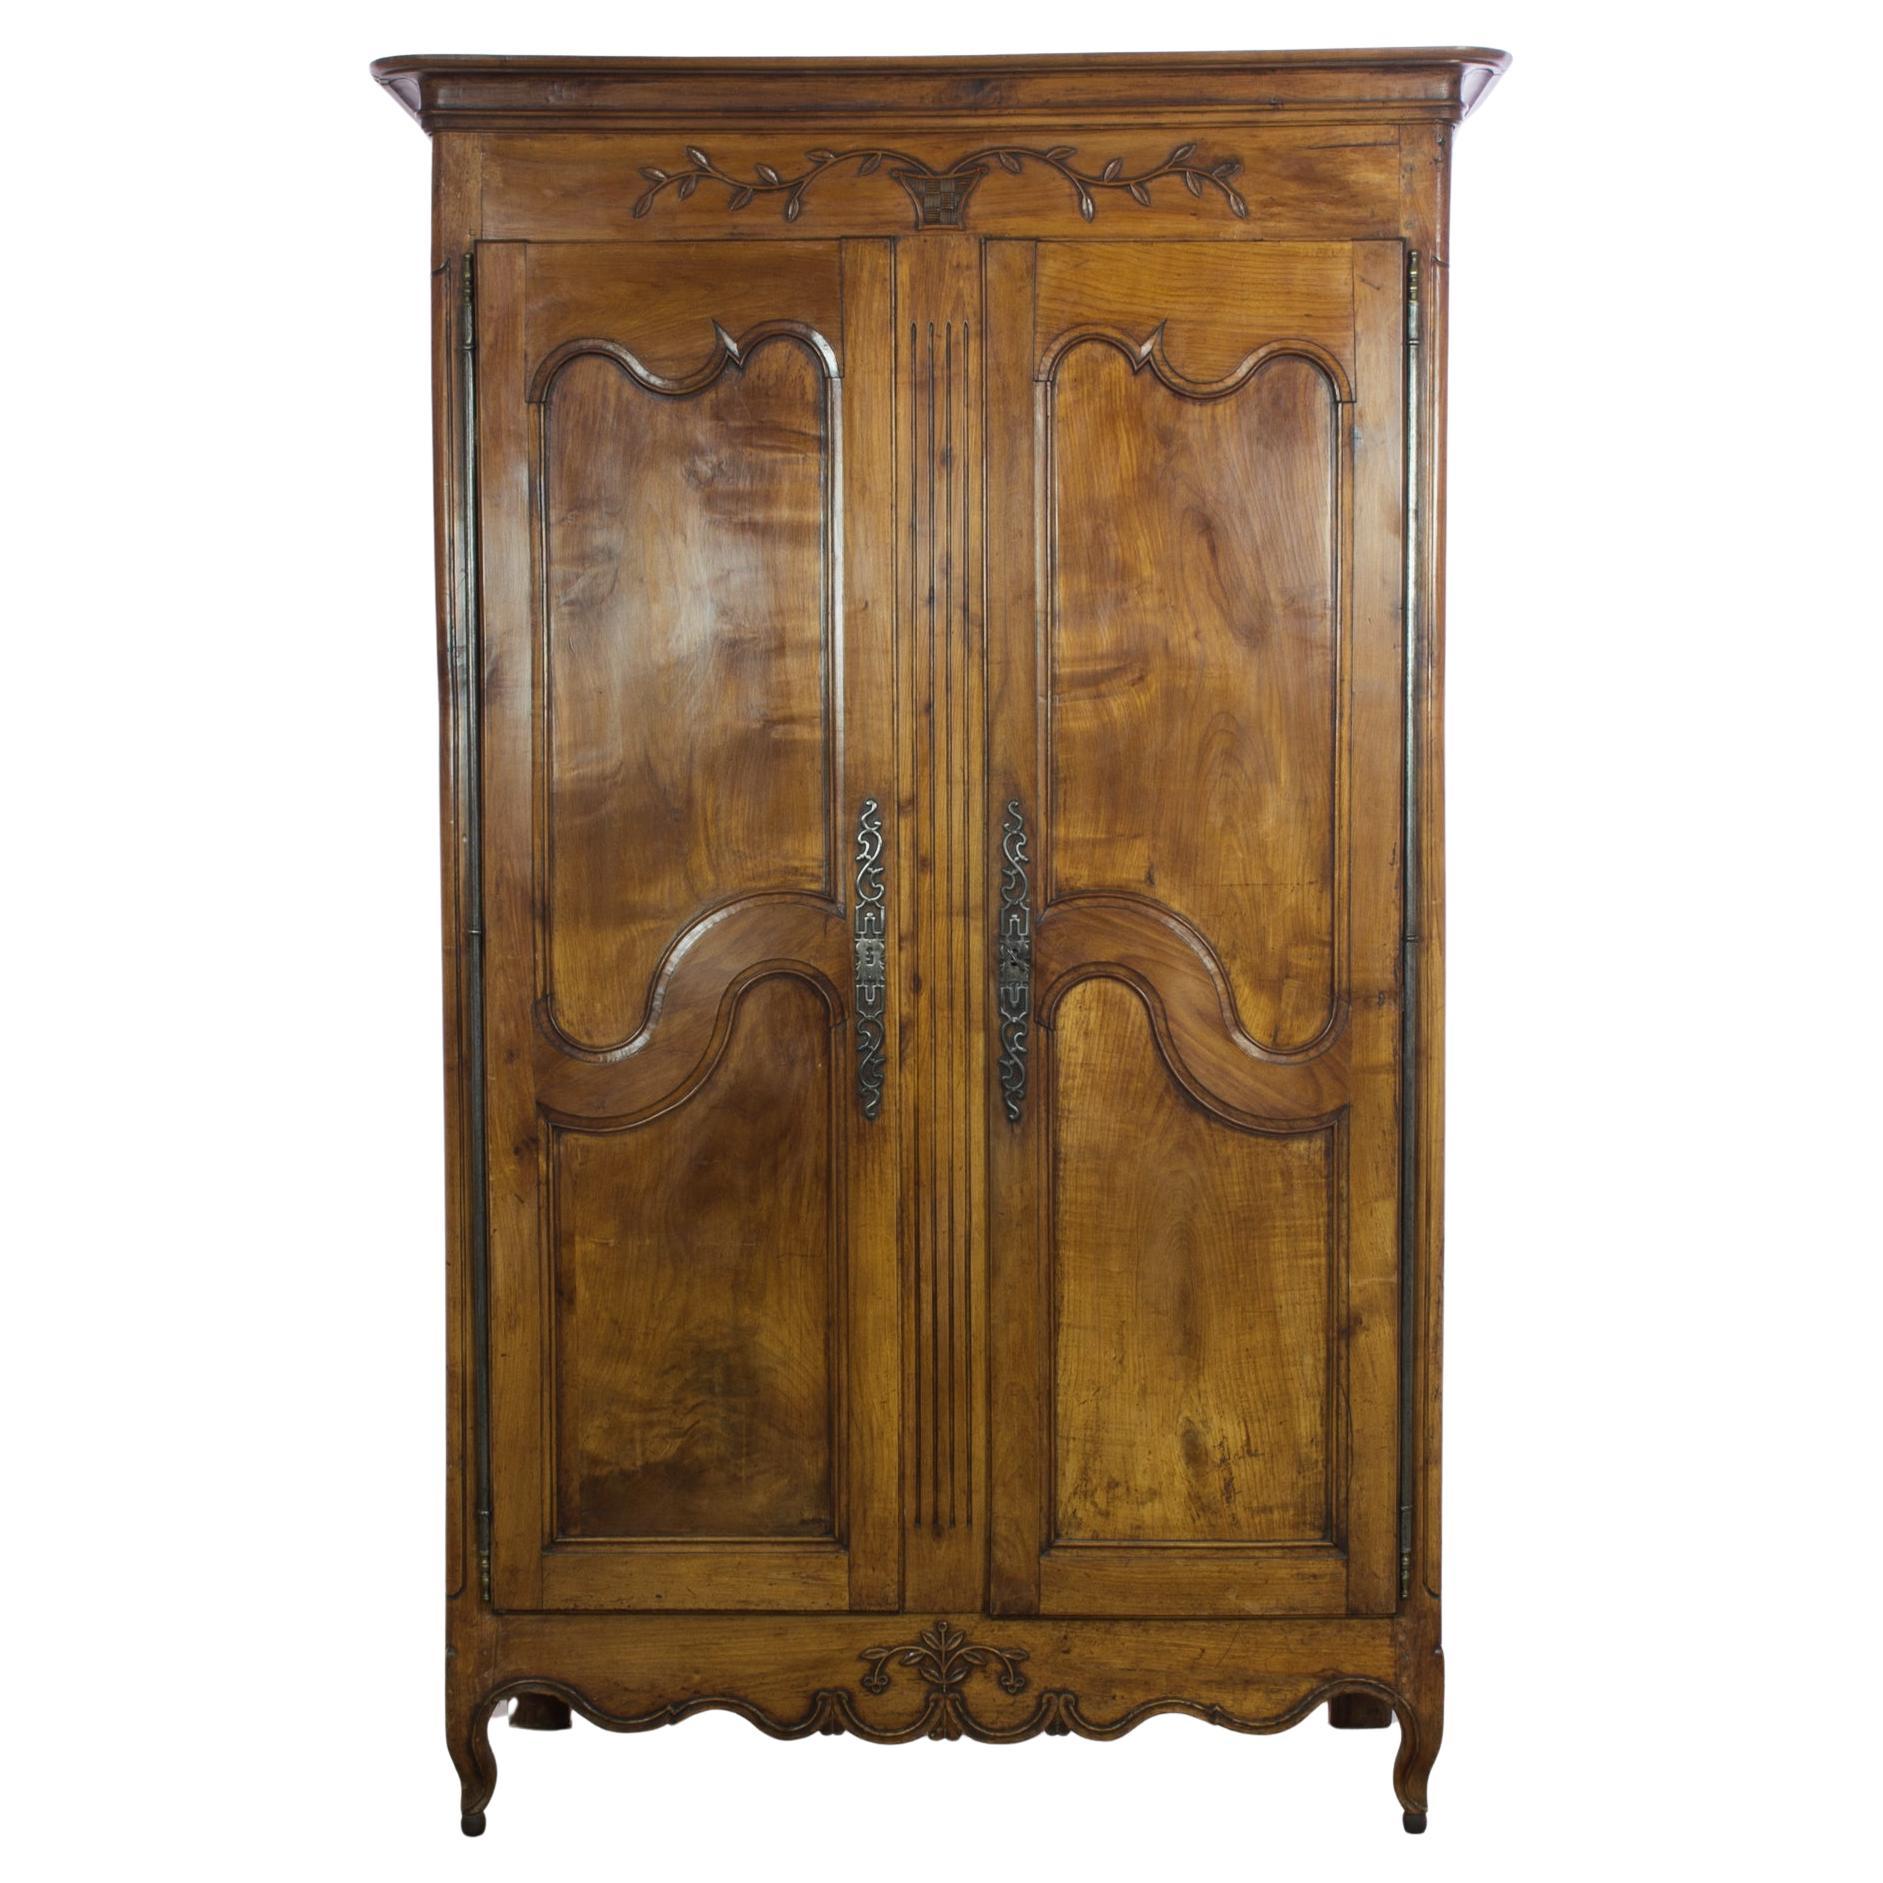 1800s French Wooden Armoire with Original Patina